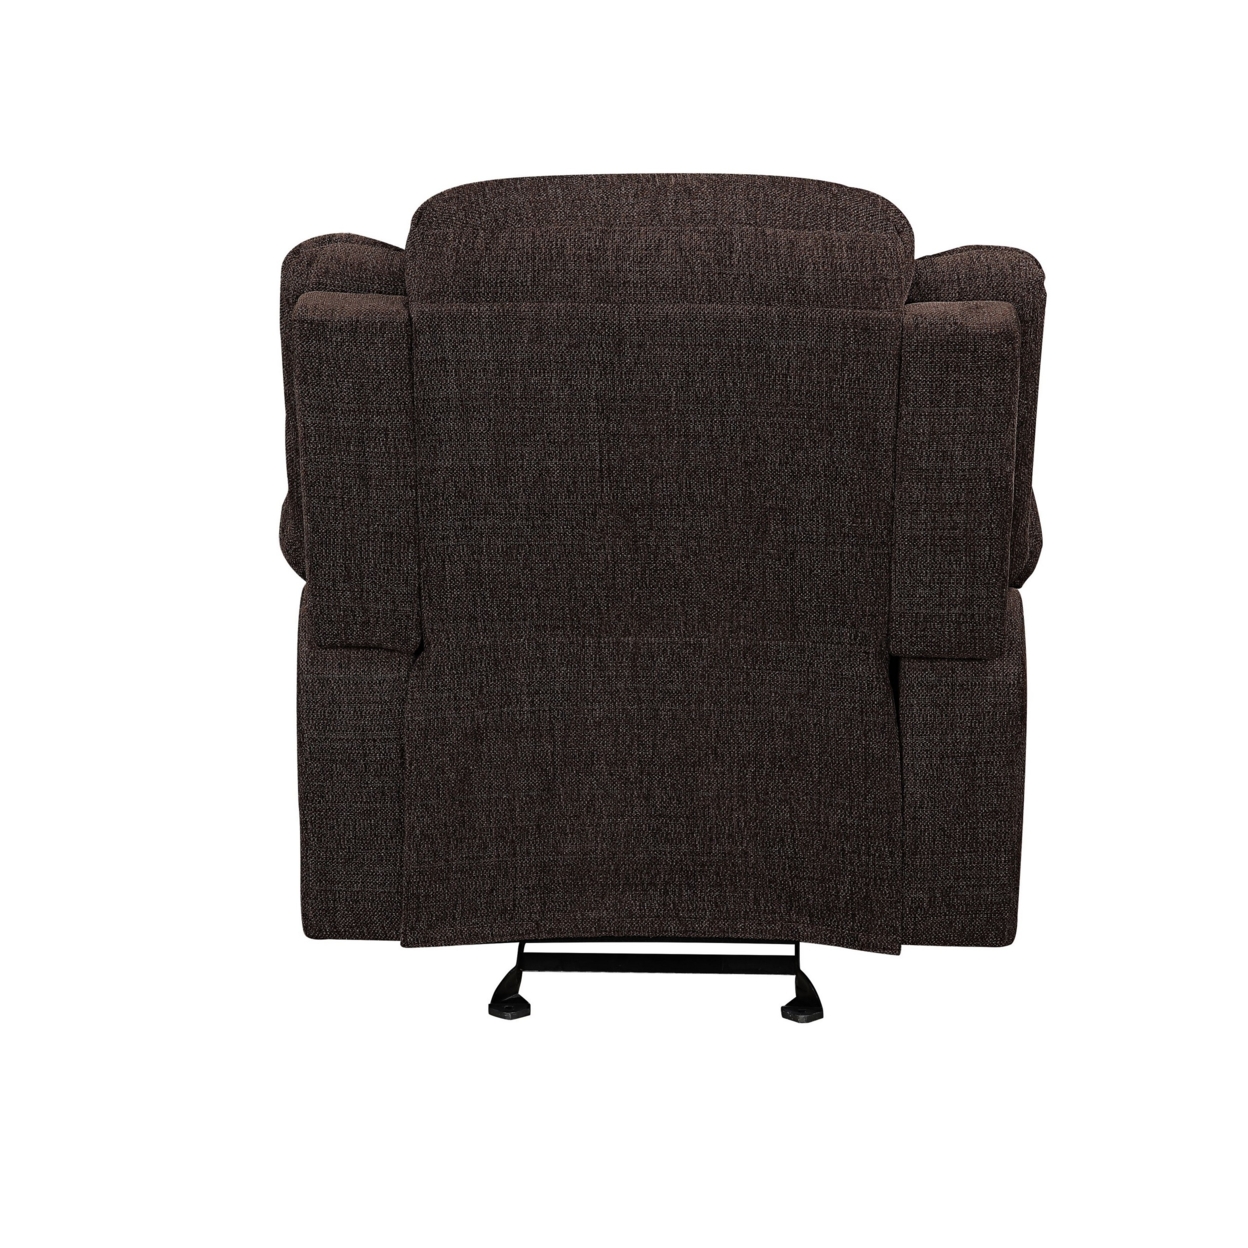 Fabric Upholstered Glider Recliner Chair With Pillow Top Armrest, Brown- Saltoro Sherpi